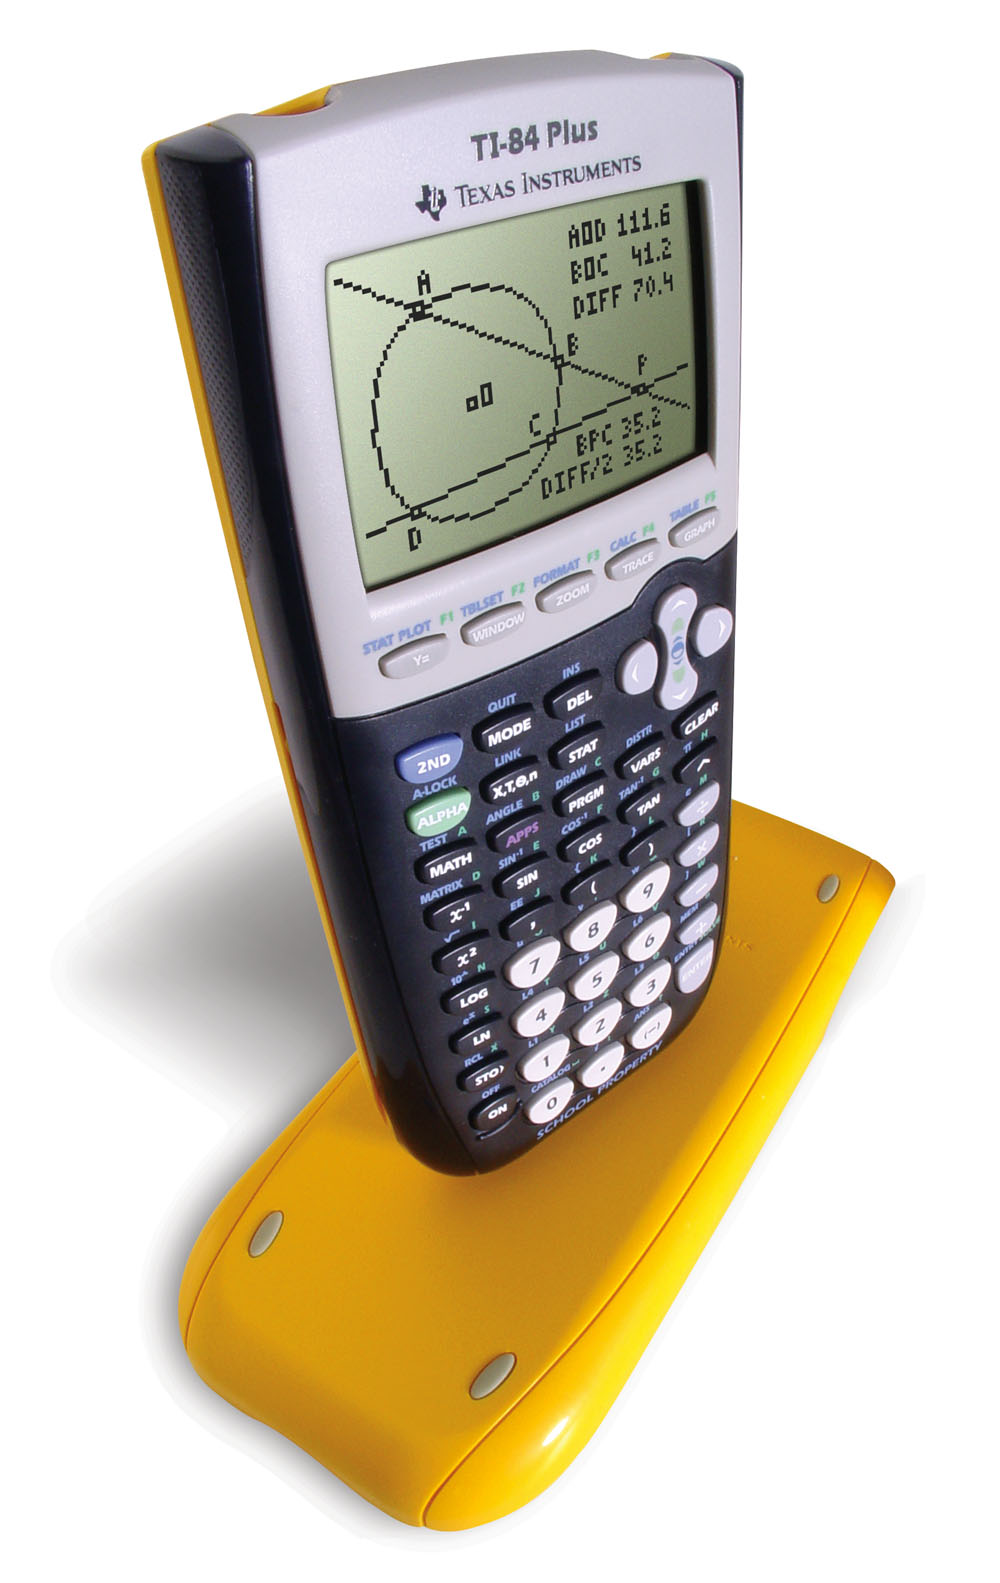 Texas instruments ti-84 plus graphing calculator yellow